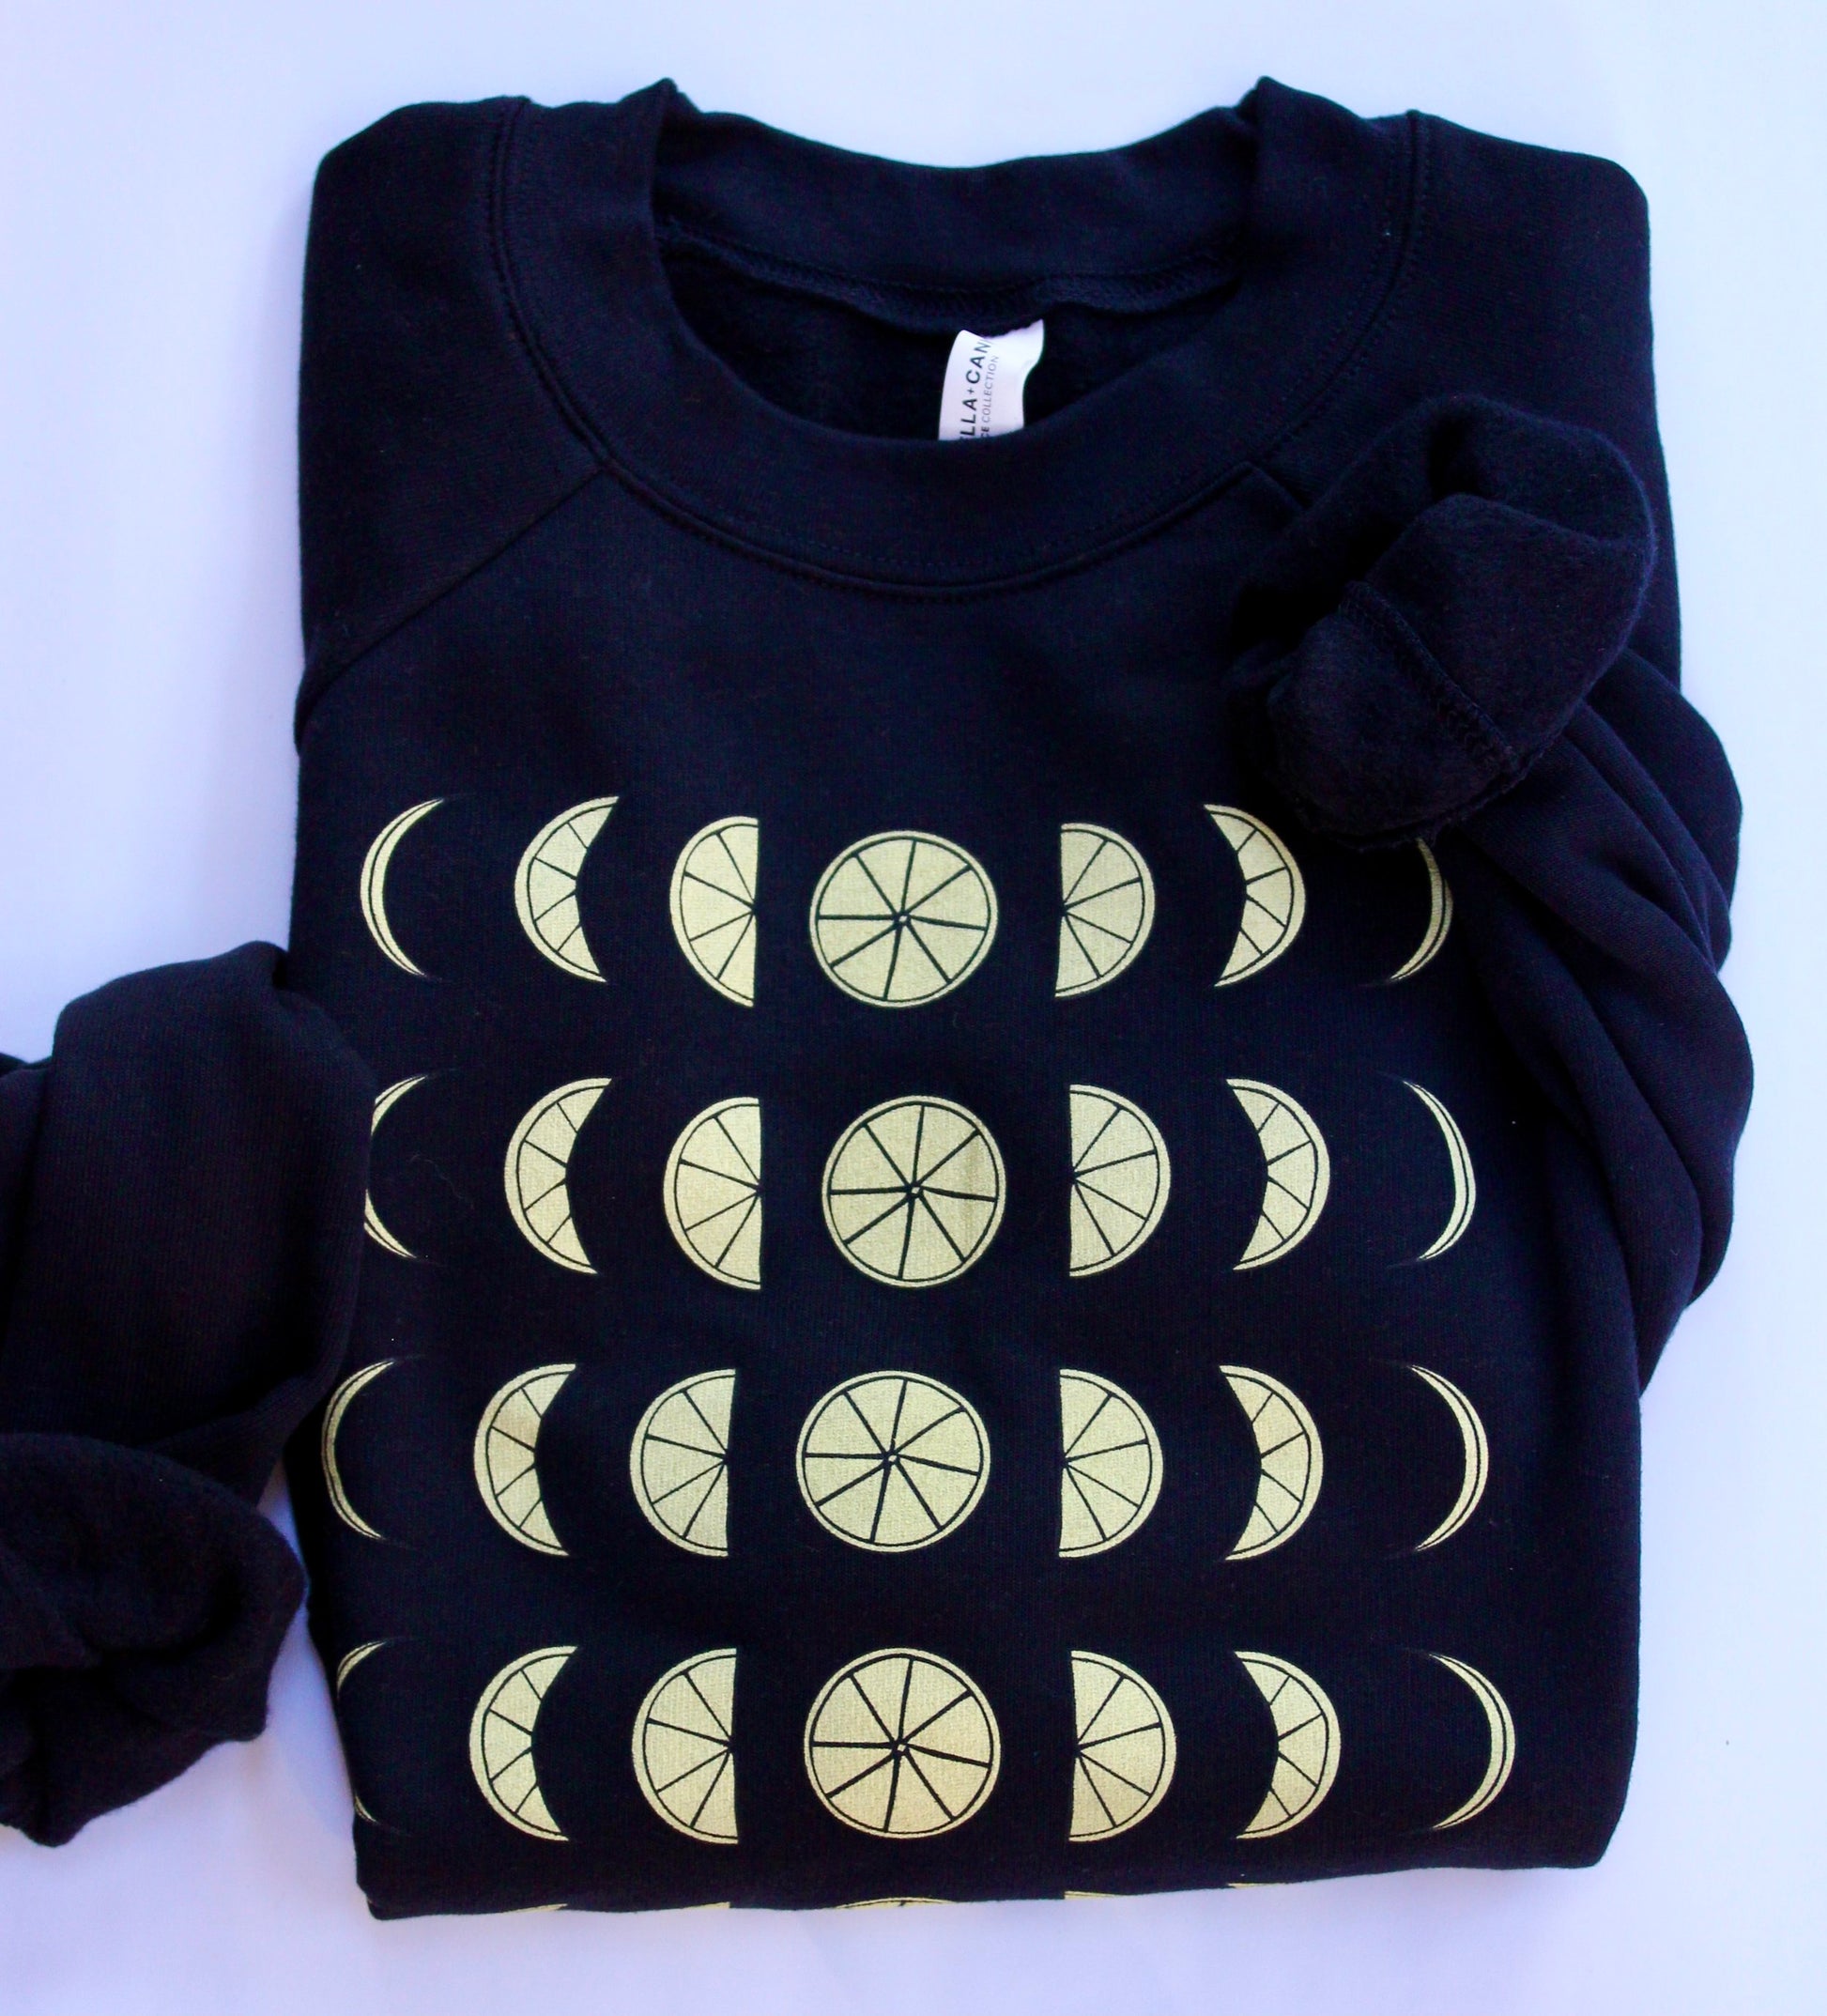 A folded cropped black sweatshirt with illustrated yellow lemons that resemble moon phases